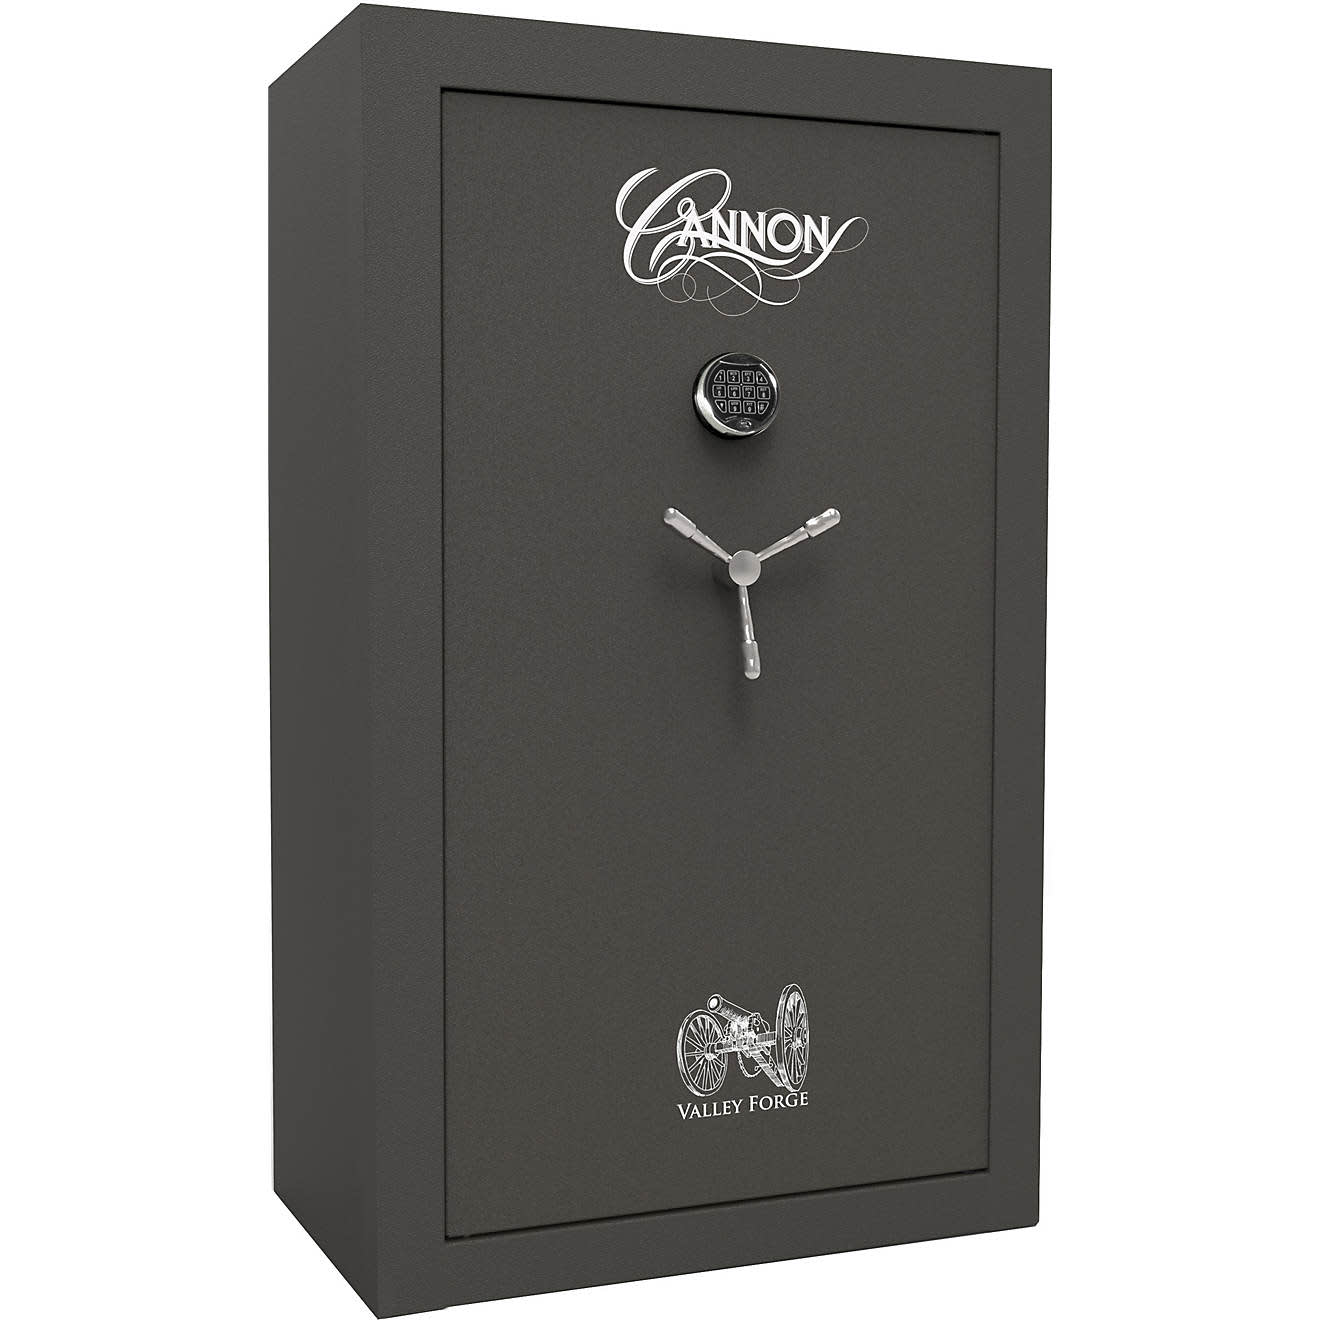 Cannon Safe Valley Forge Series 42-Gun Safe - 30% off!